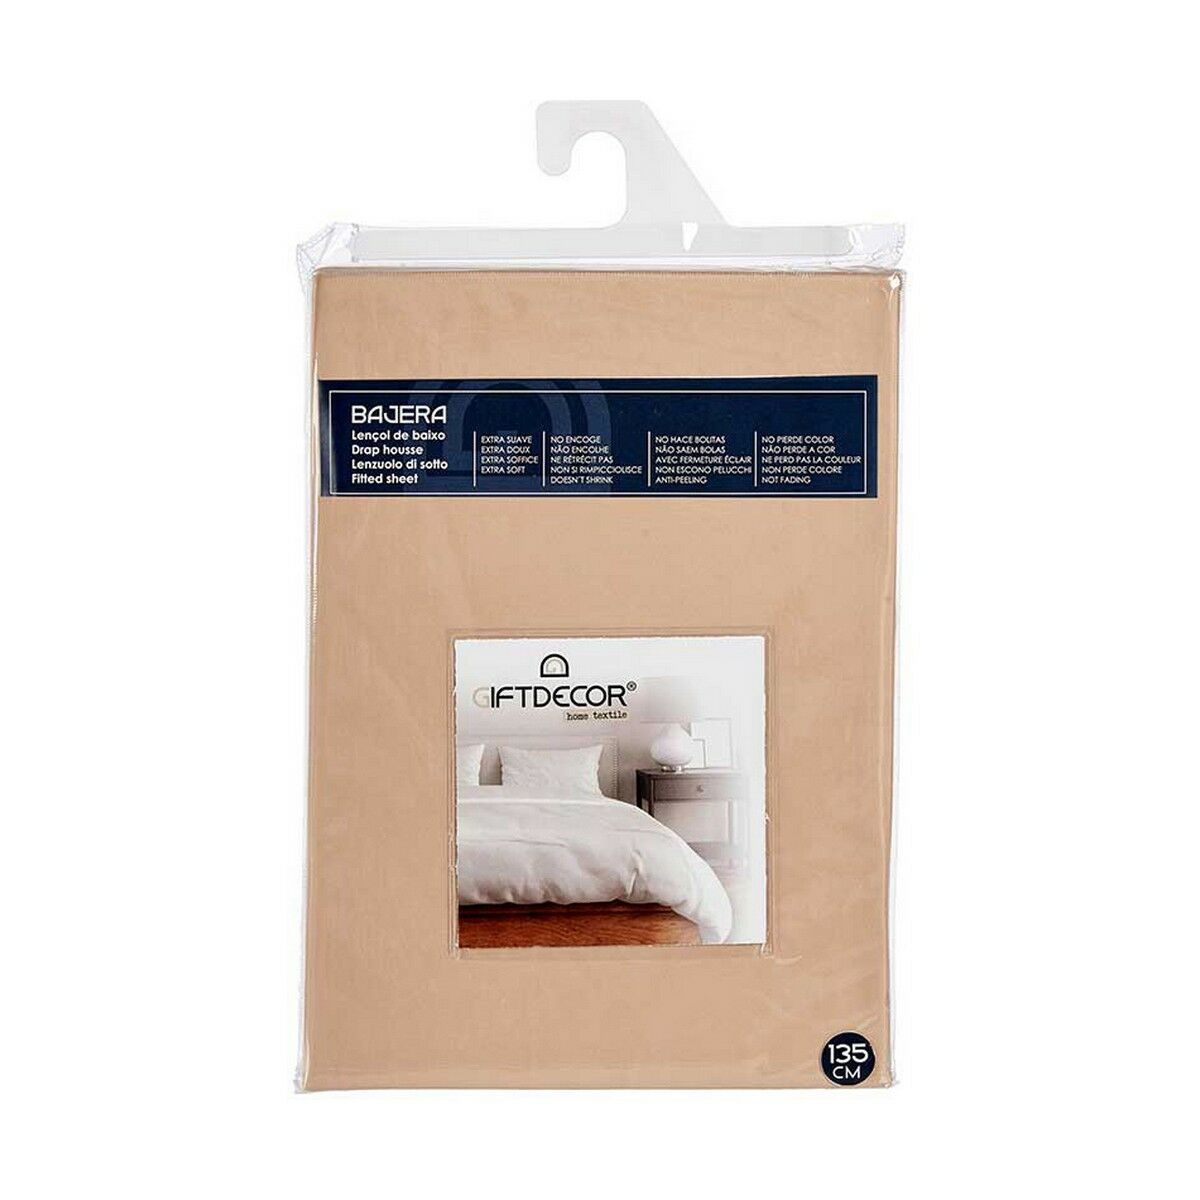 Fitted sheet 135 cm Beige (12 Units)